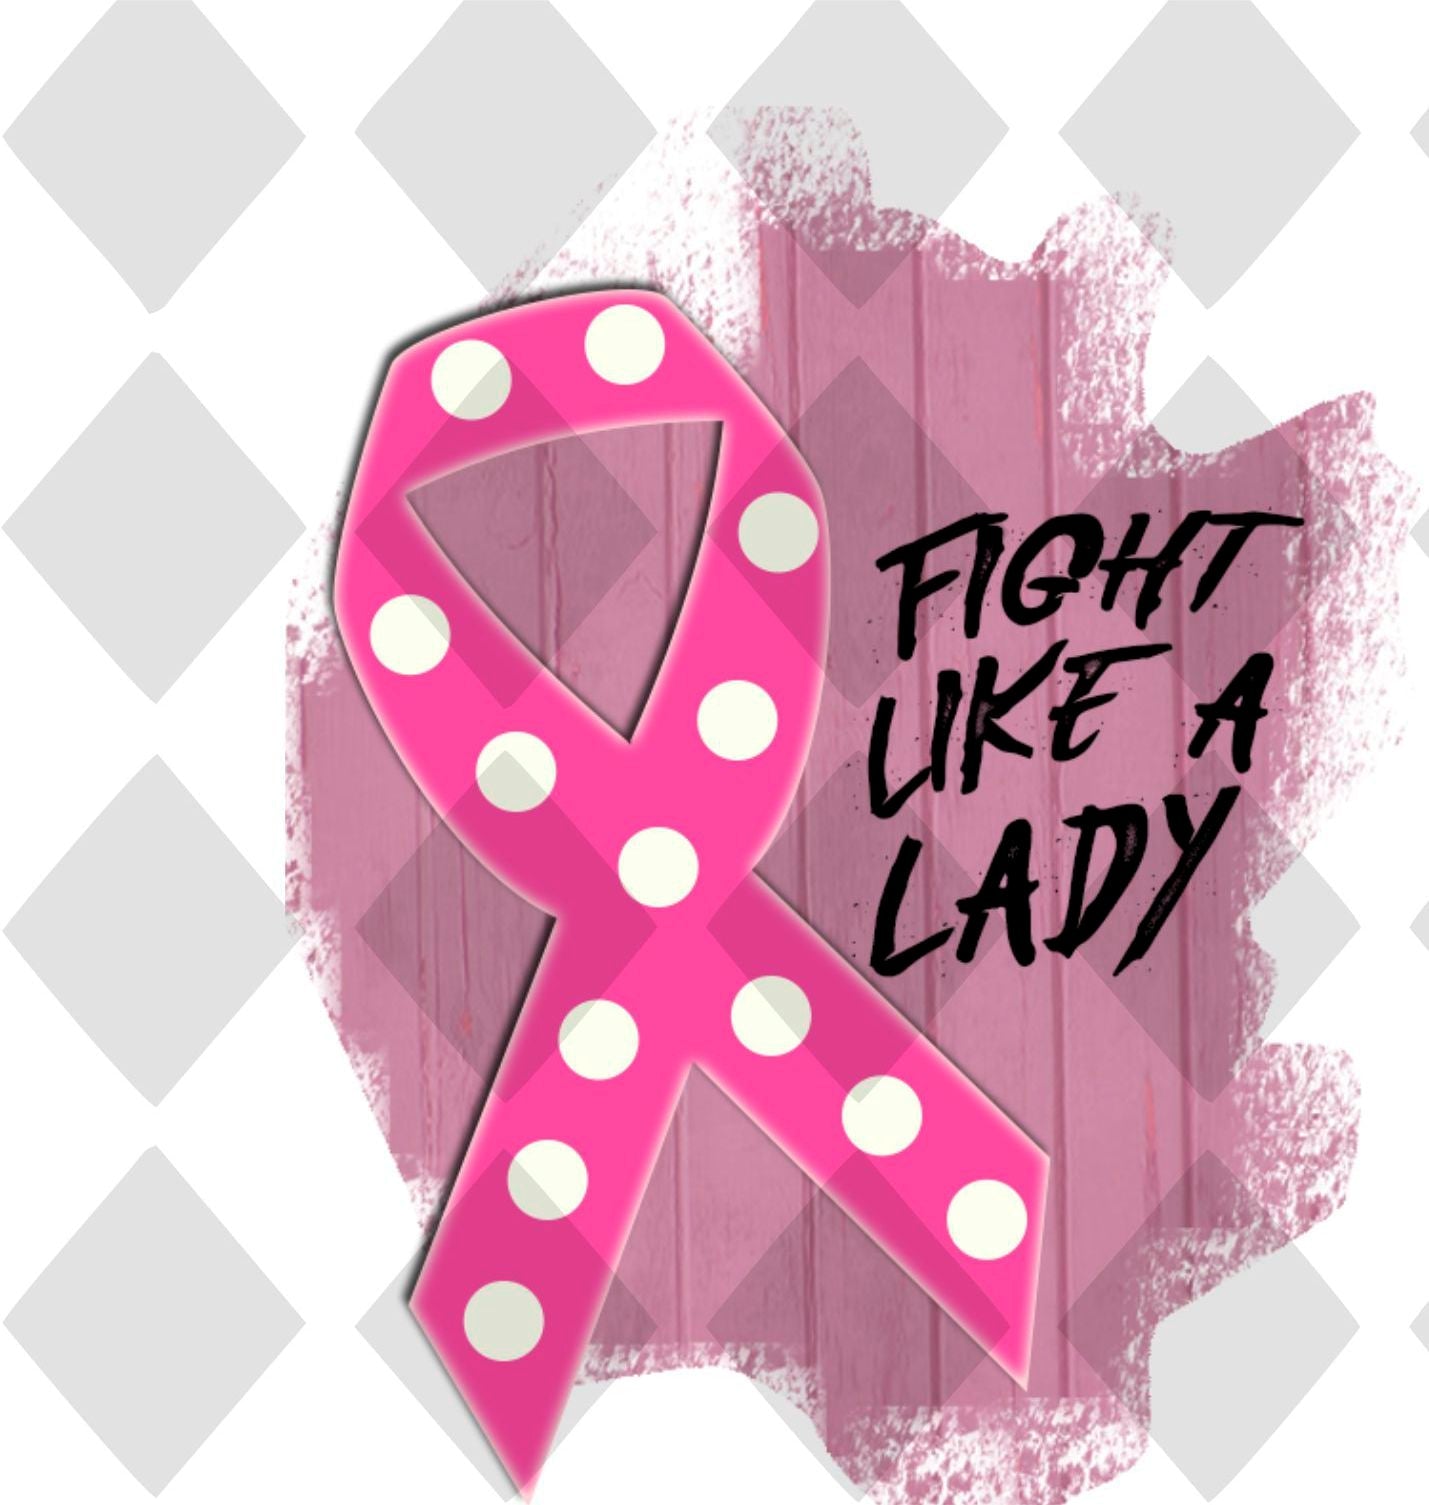 Fight Like a Lady october Digital Download Instand Download